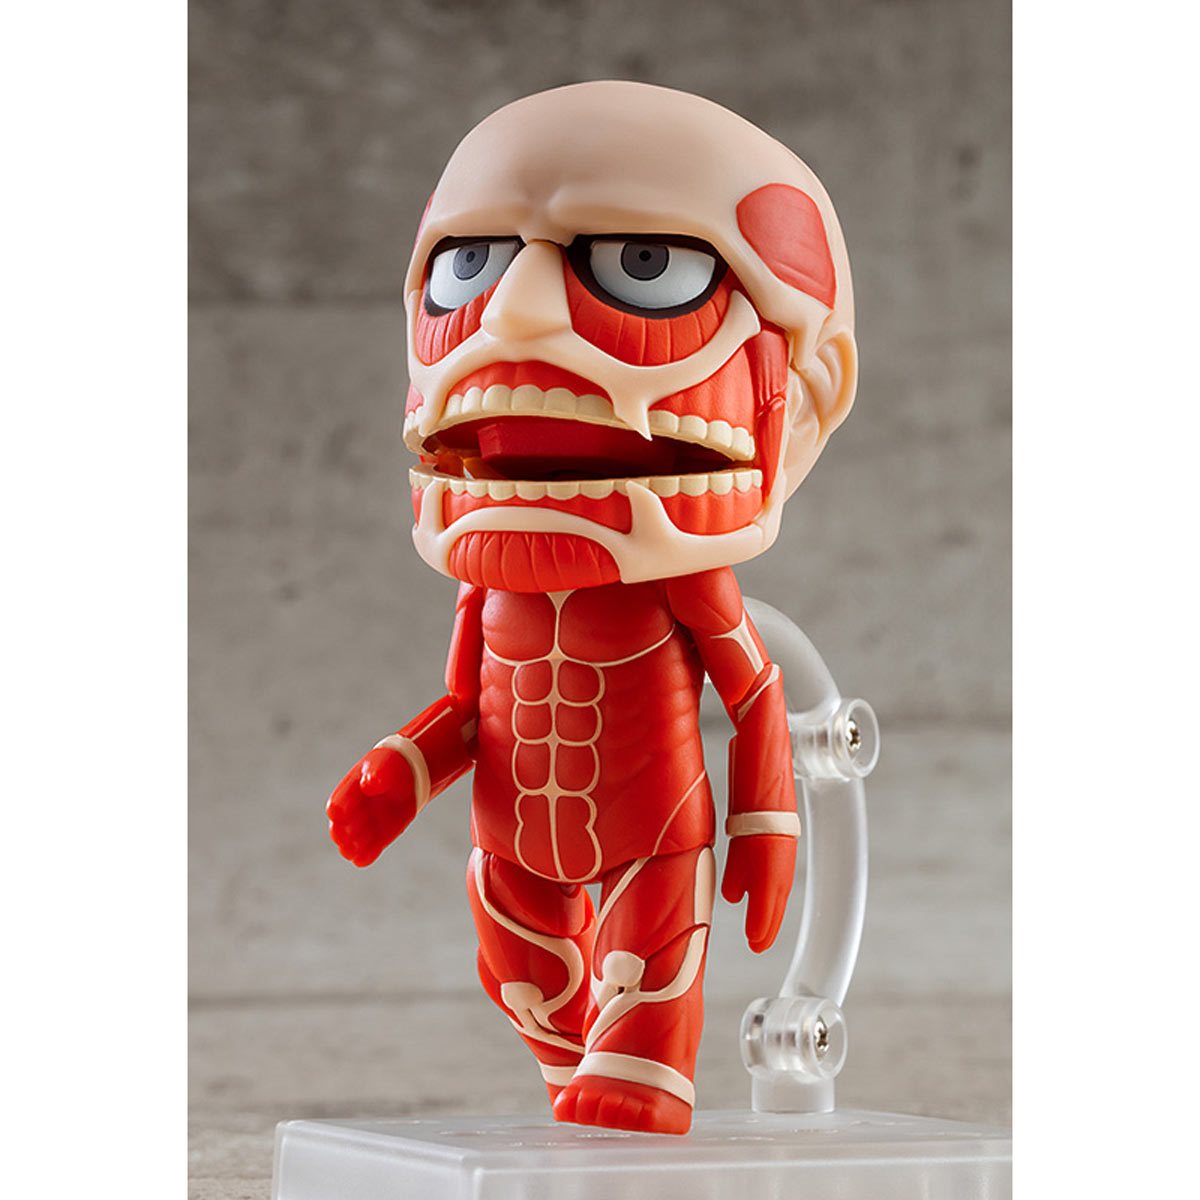 Youtooz Colossal Titan Vinyl Figure, 5 Colossal Titan from Attack on Titan  Series Anime Figure - Detailed Collectible Figurines